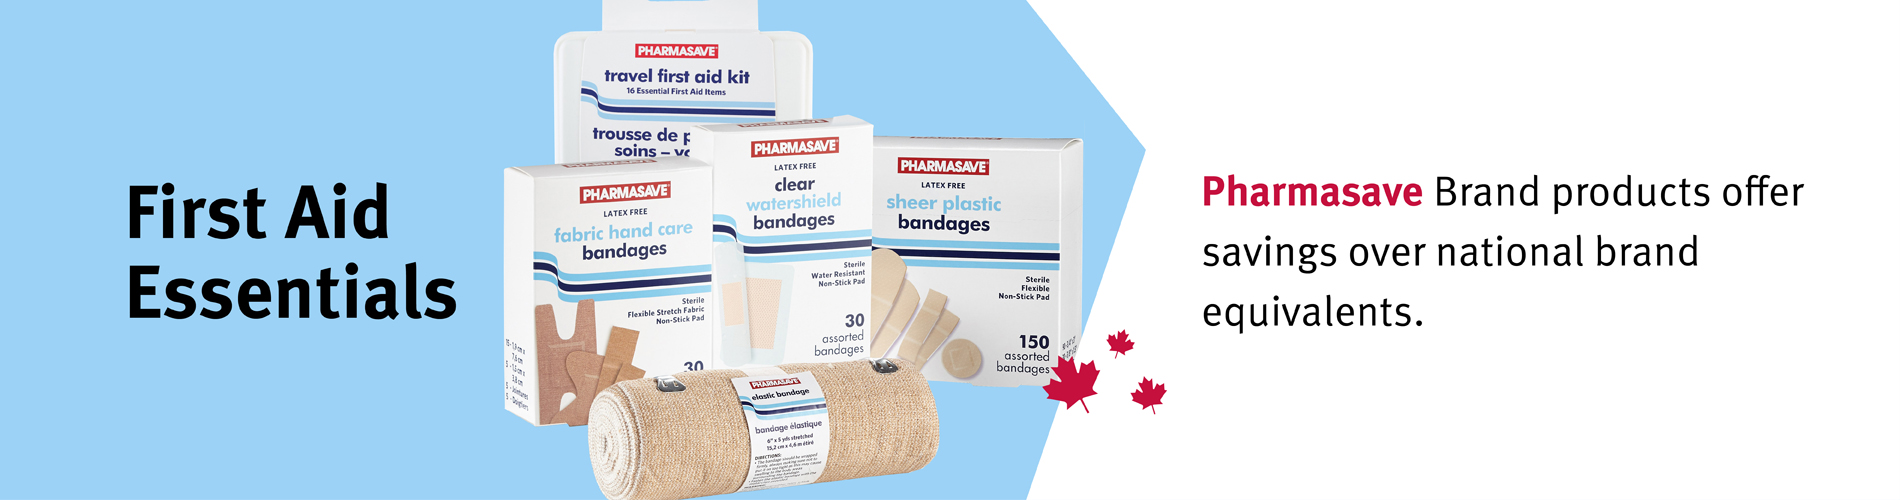 Get all your first aid essentials at Pharmasave.